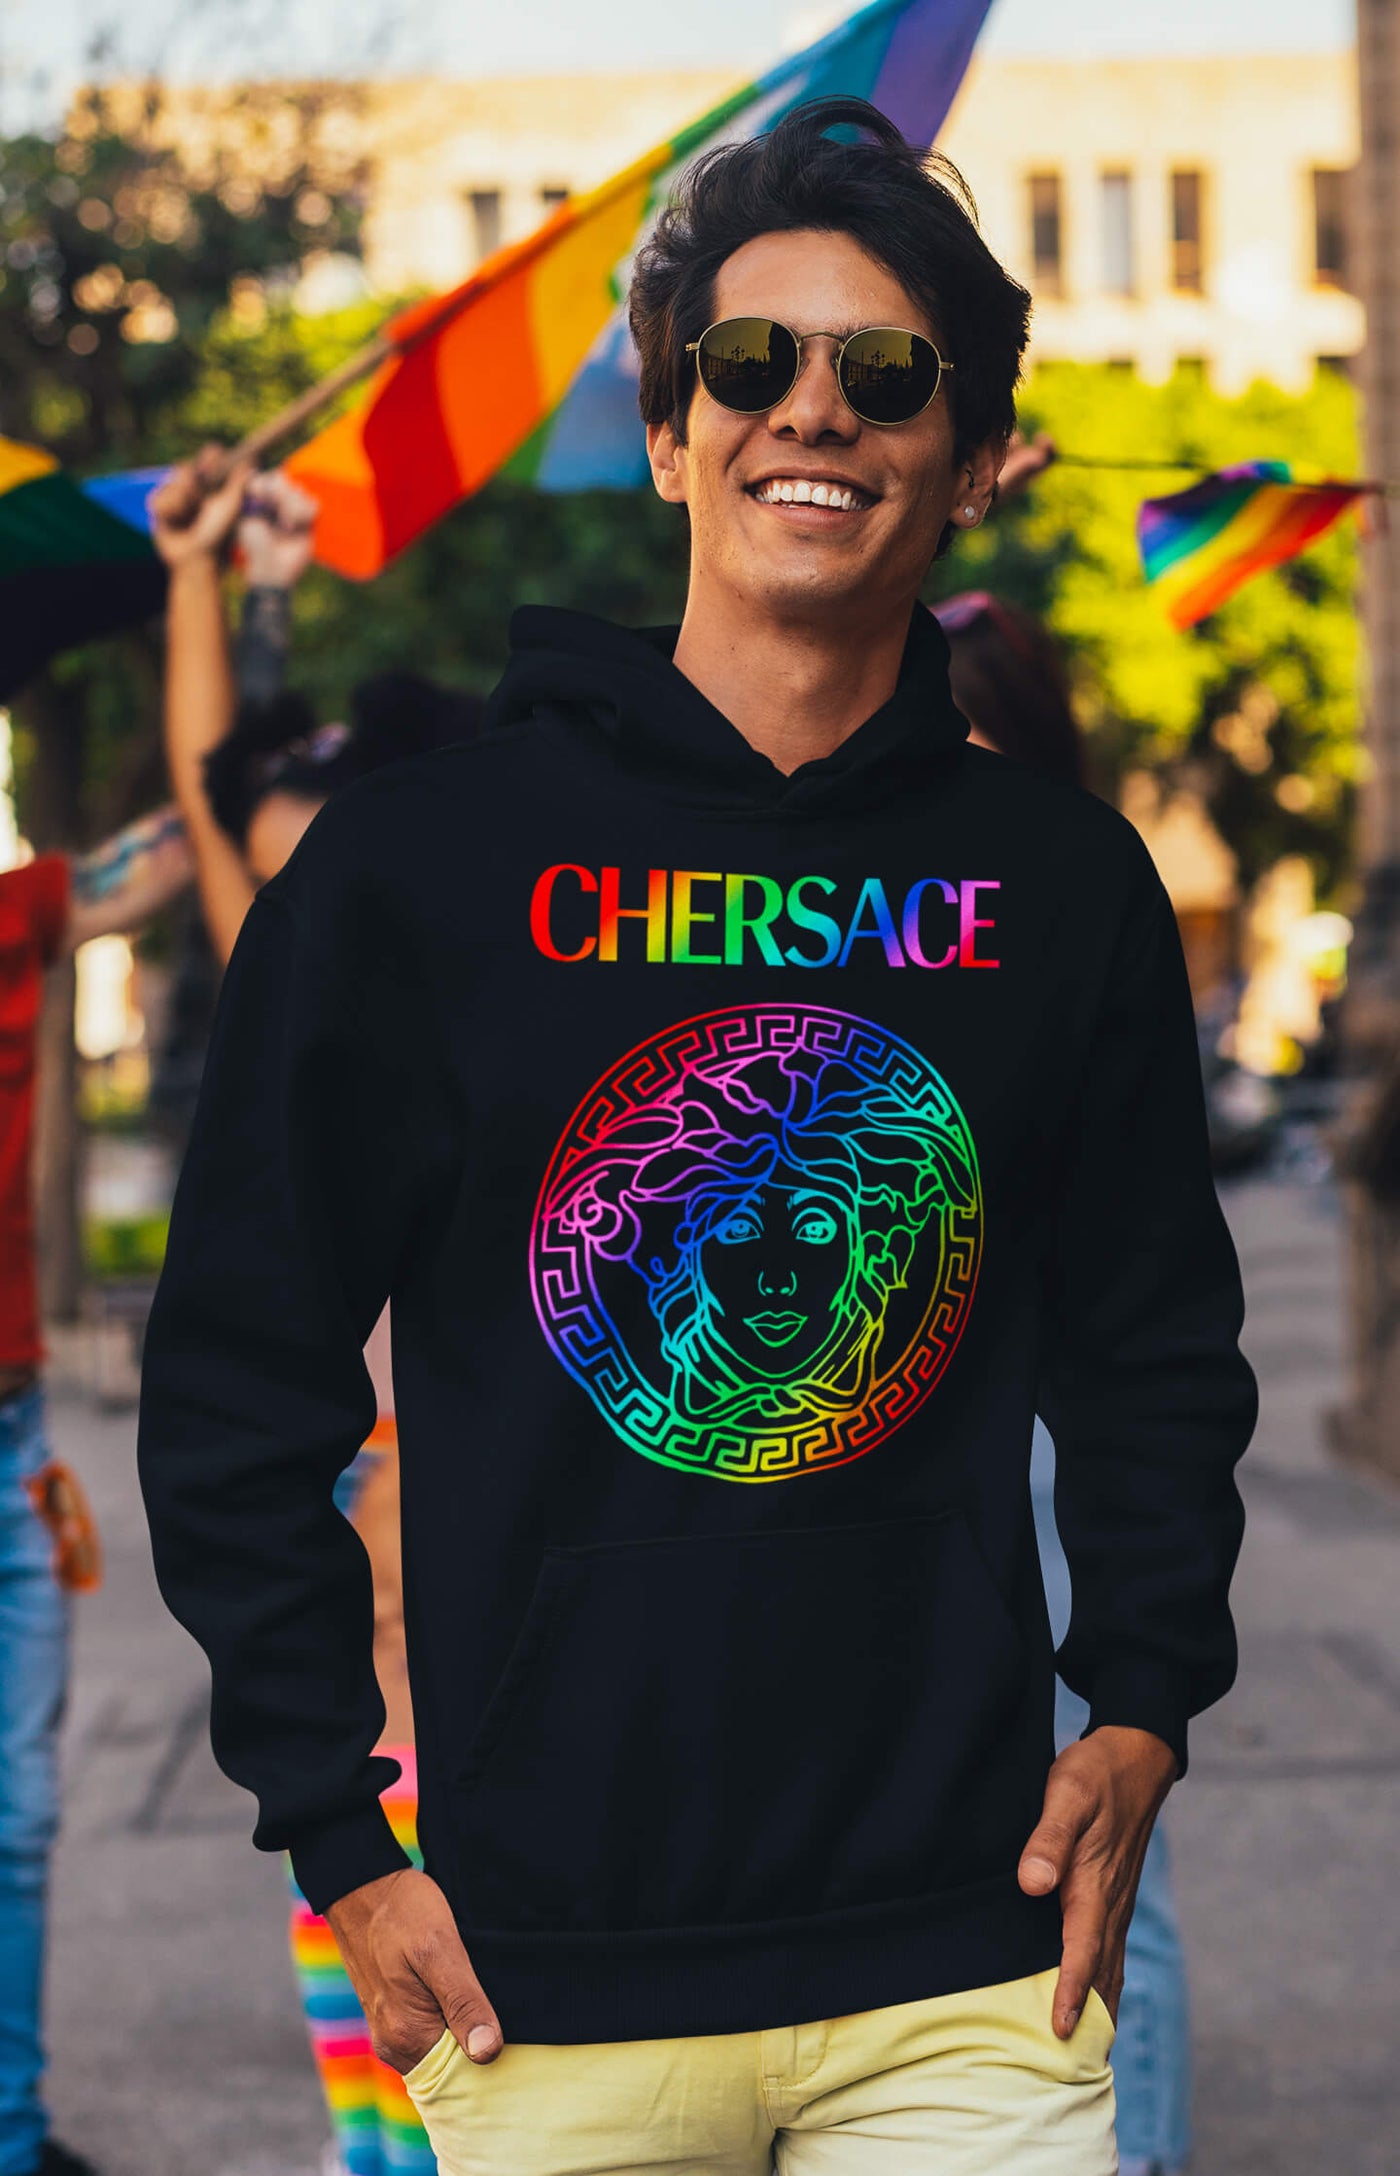 Stylish man with a CHERSACE by Gllamazon hoodie at the Pride parade.